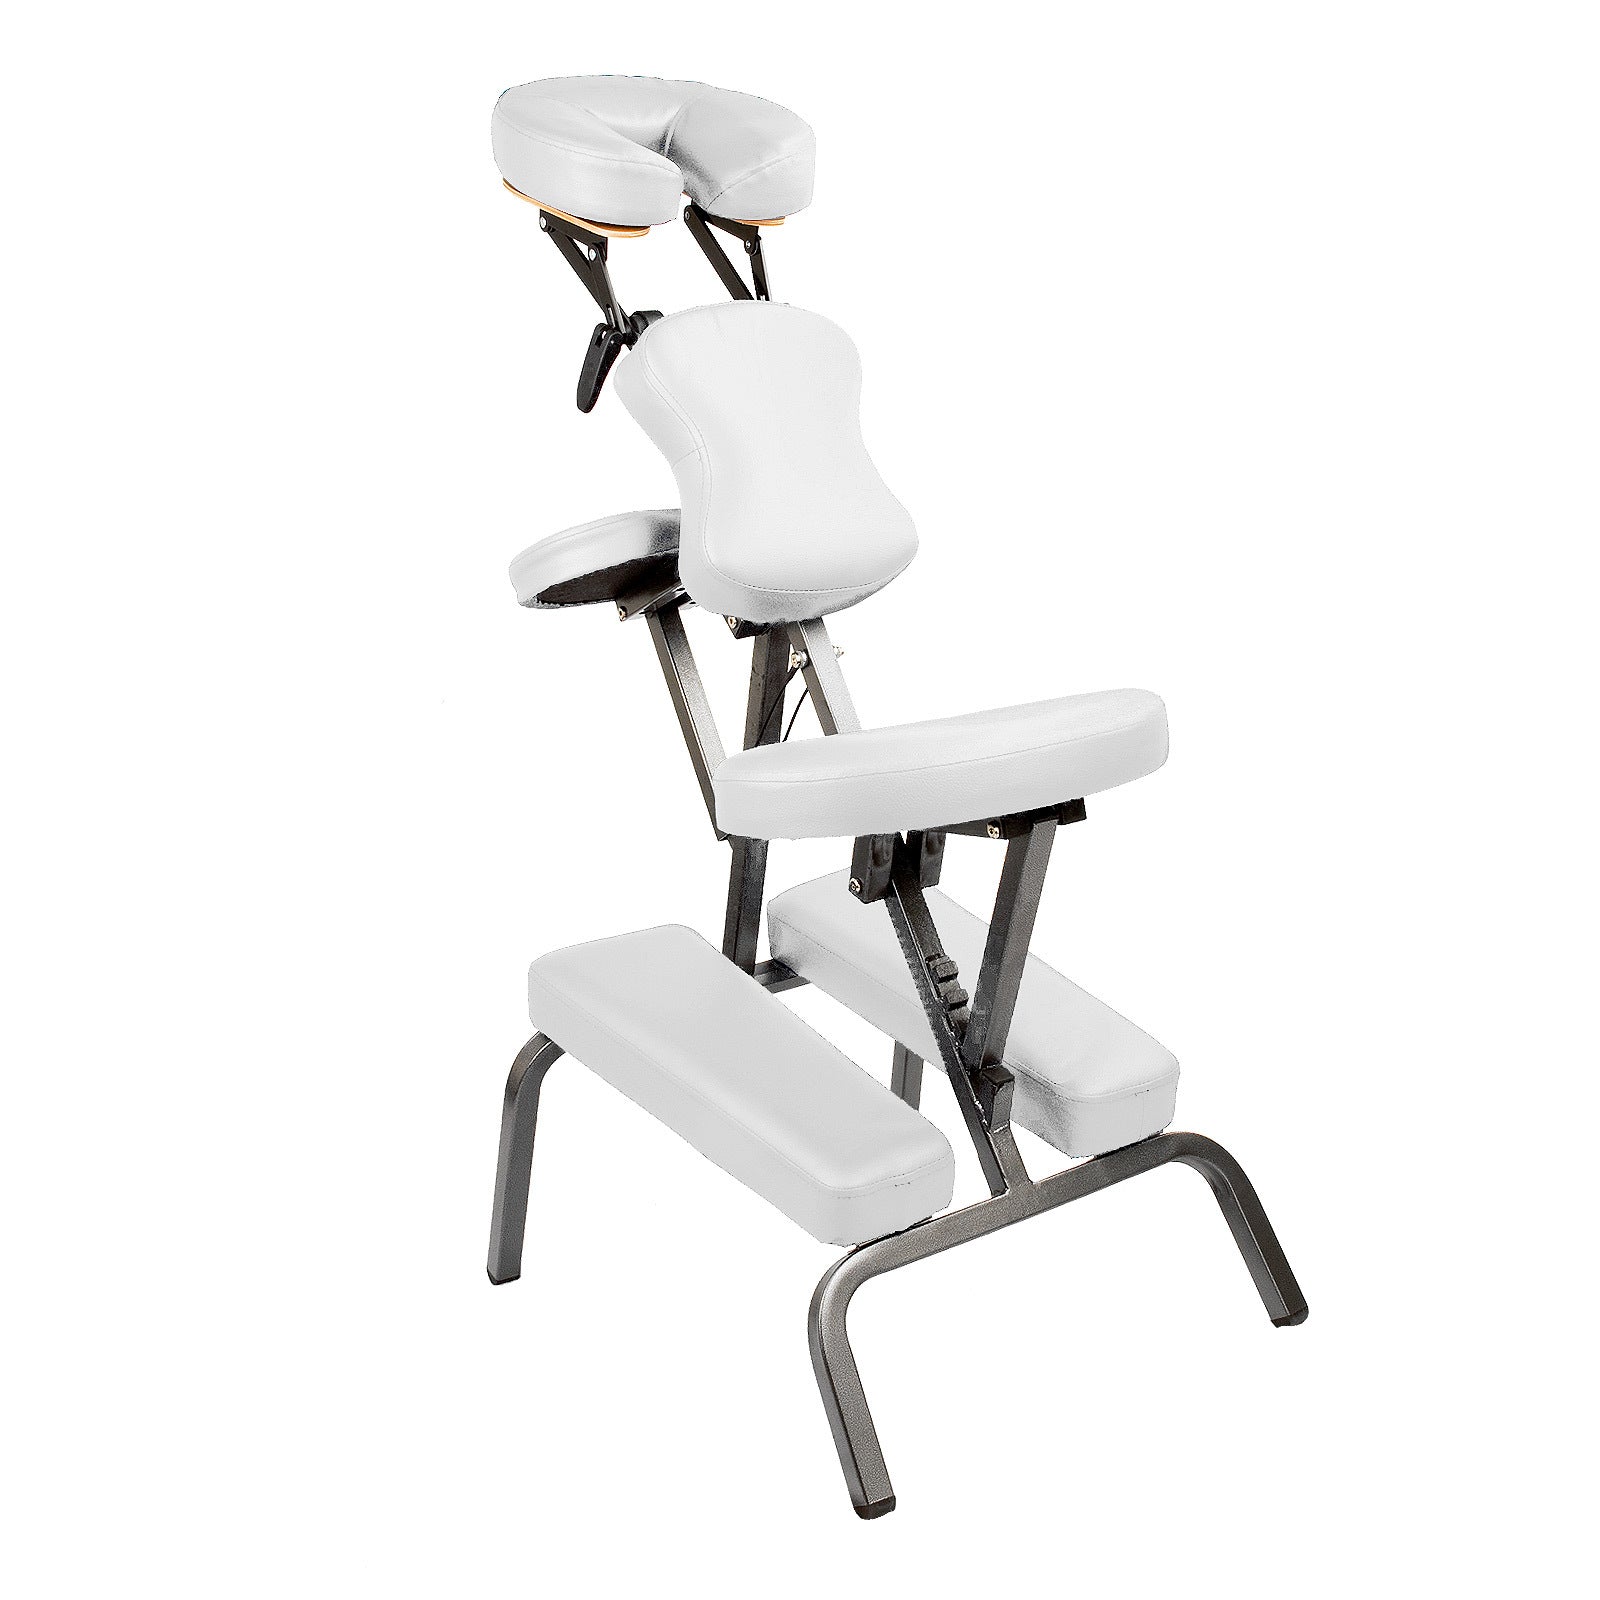 Forever Beauty White Portable Beauty Massage Foldable Chair Table Therapy Waxing Aluminium - SILBERSHELL